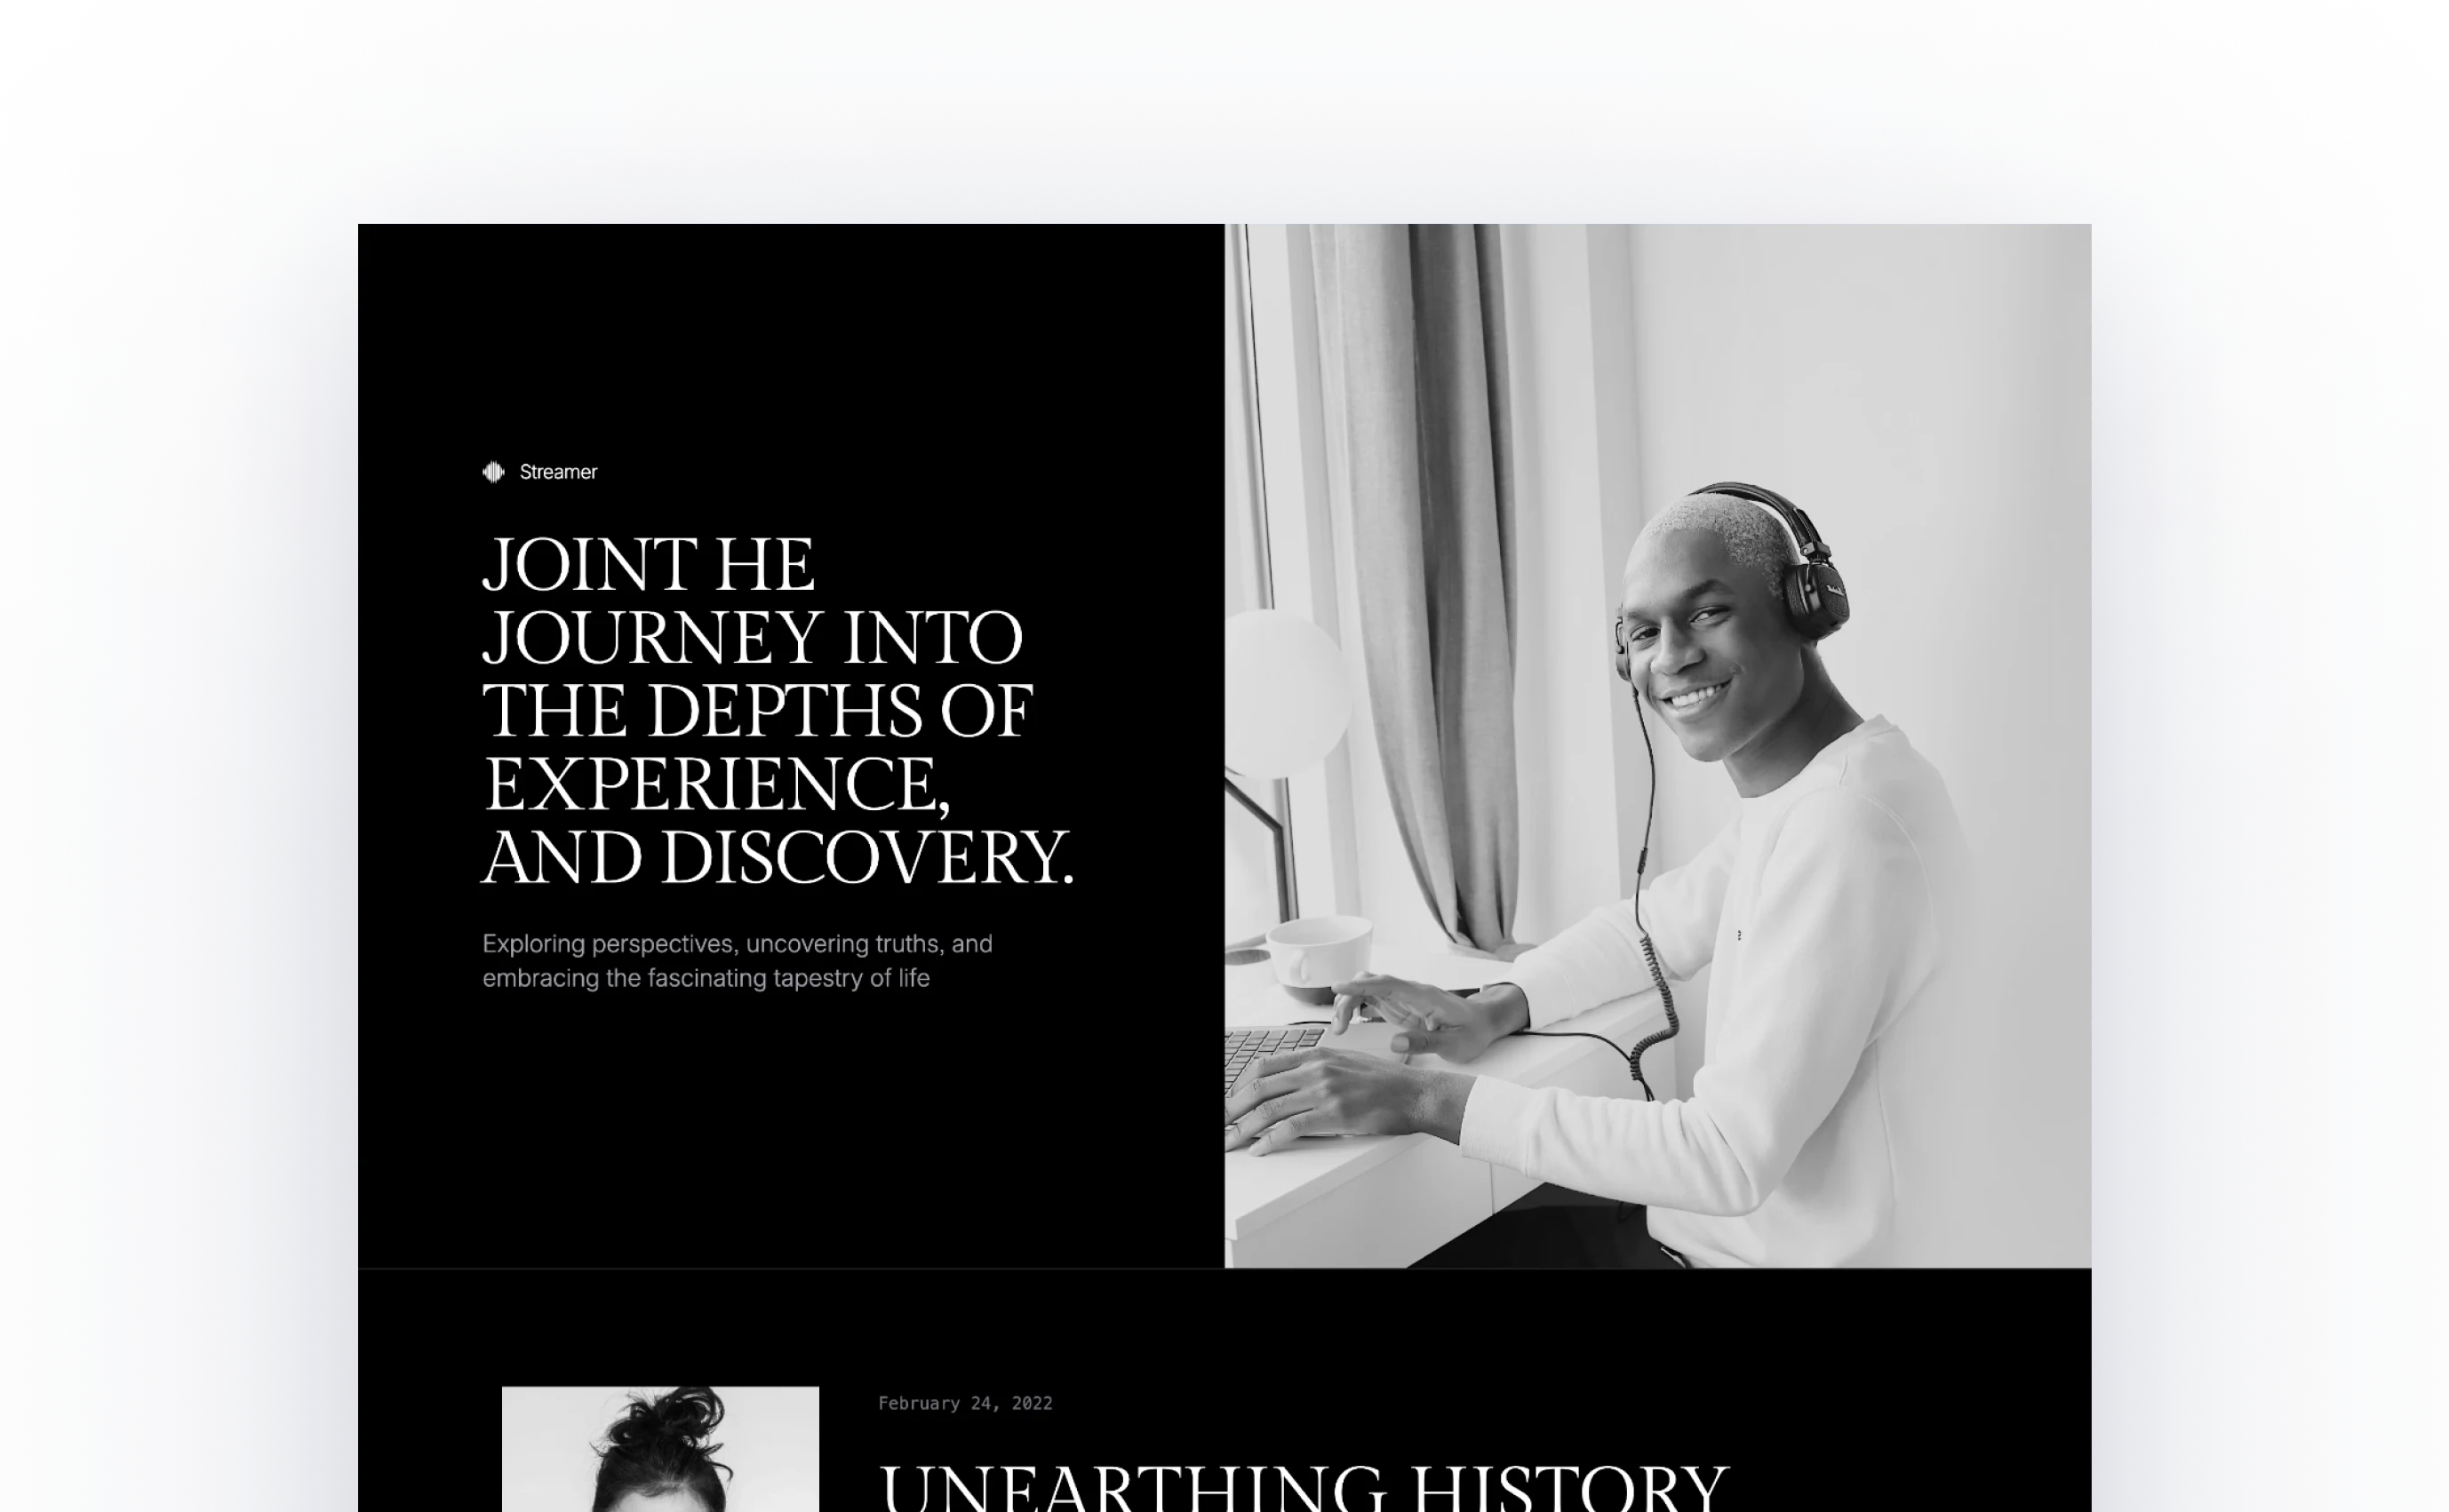 Streamer theme with a black and white aesthetic featuring a smiling person wearing headphones at a desk. The header invites readers to 'Join the journey into the depths of experience, and discovery,' setting a tone of exploration and uncovering truths.